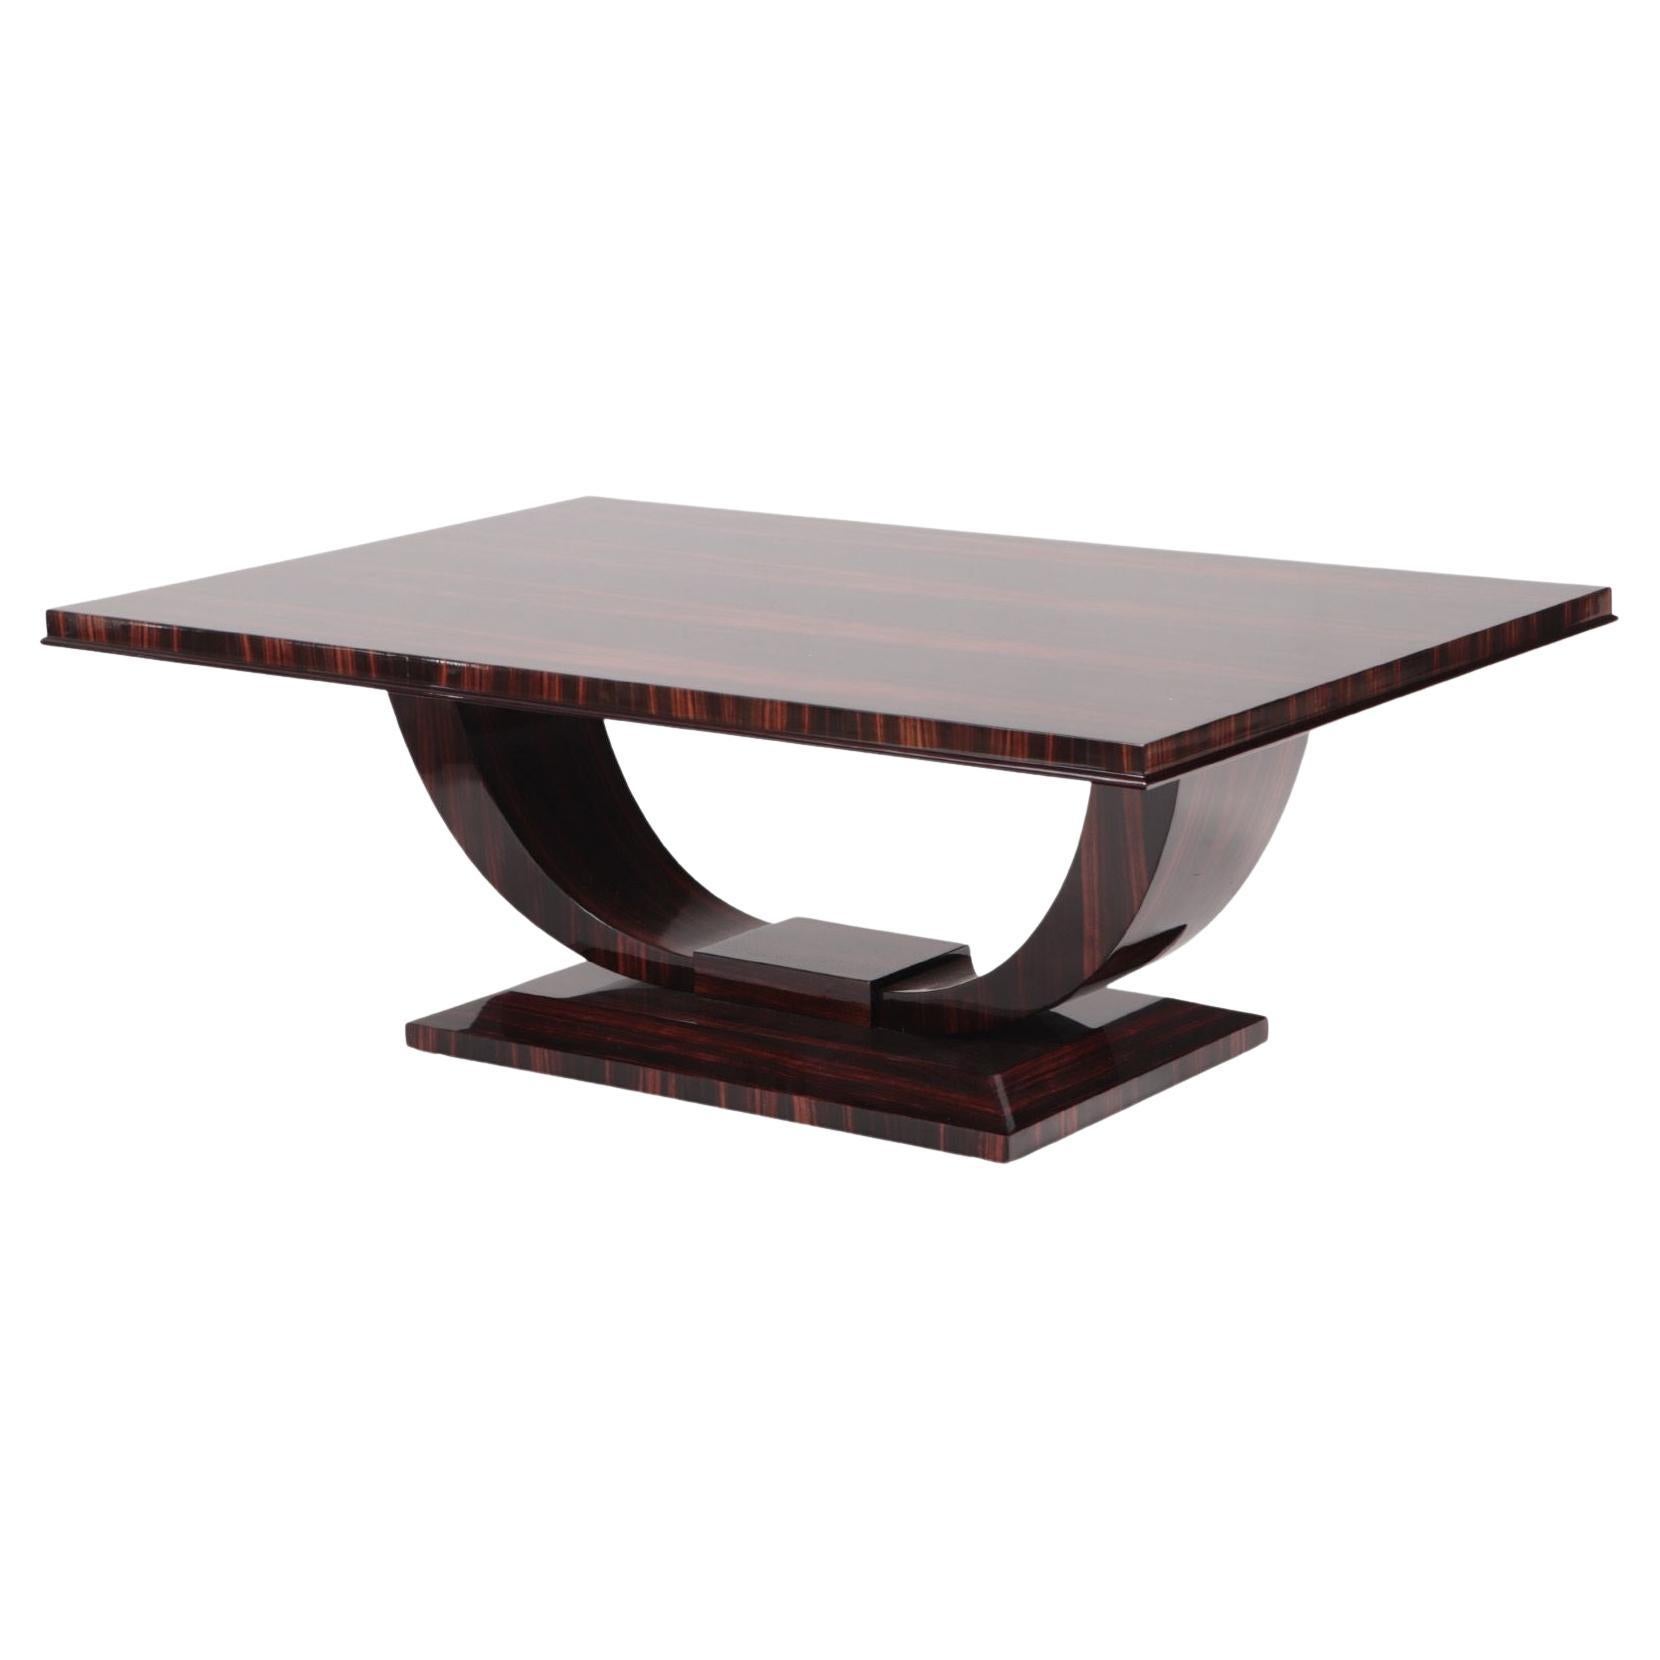 A French macassar ebony coffee table made by Romeo Furniture, Paris, France